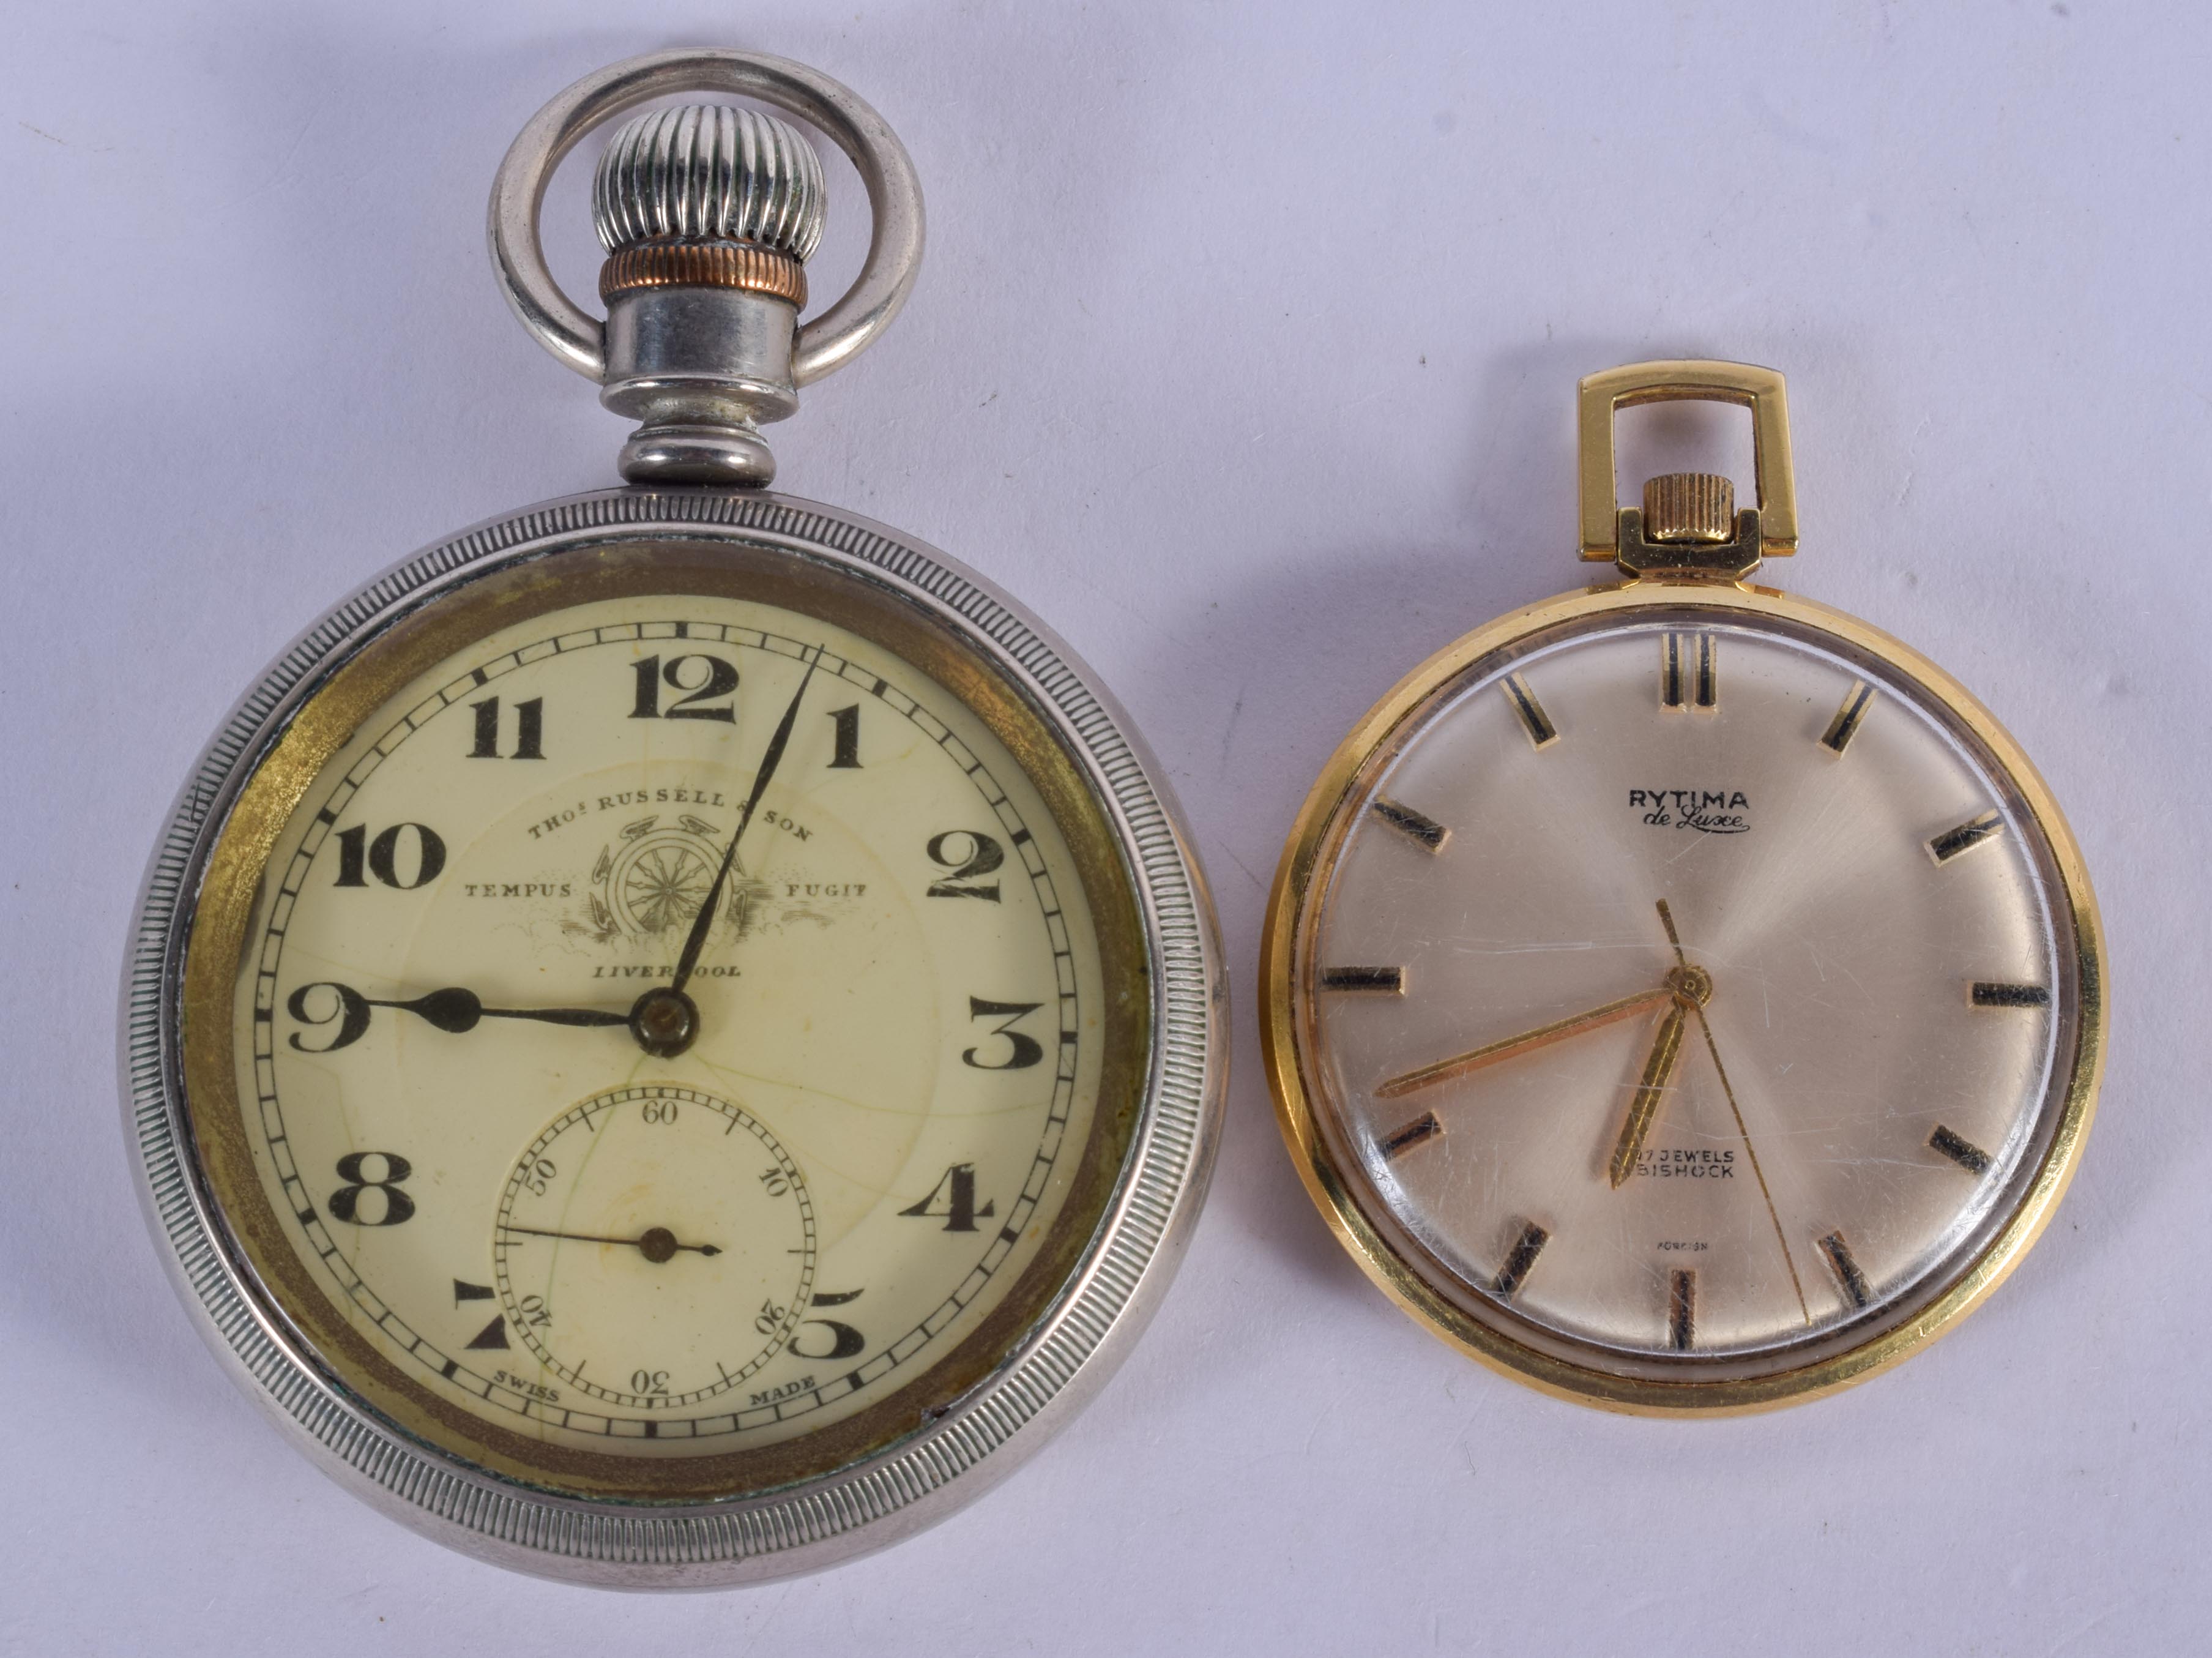 A THOMAS RUSSEL & SON POCKET WATCH and a smaller retime watch. Largest 5 cm wide. (2)